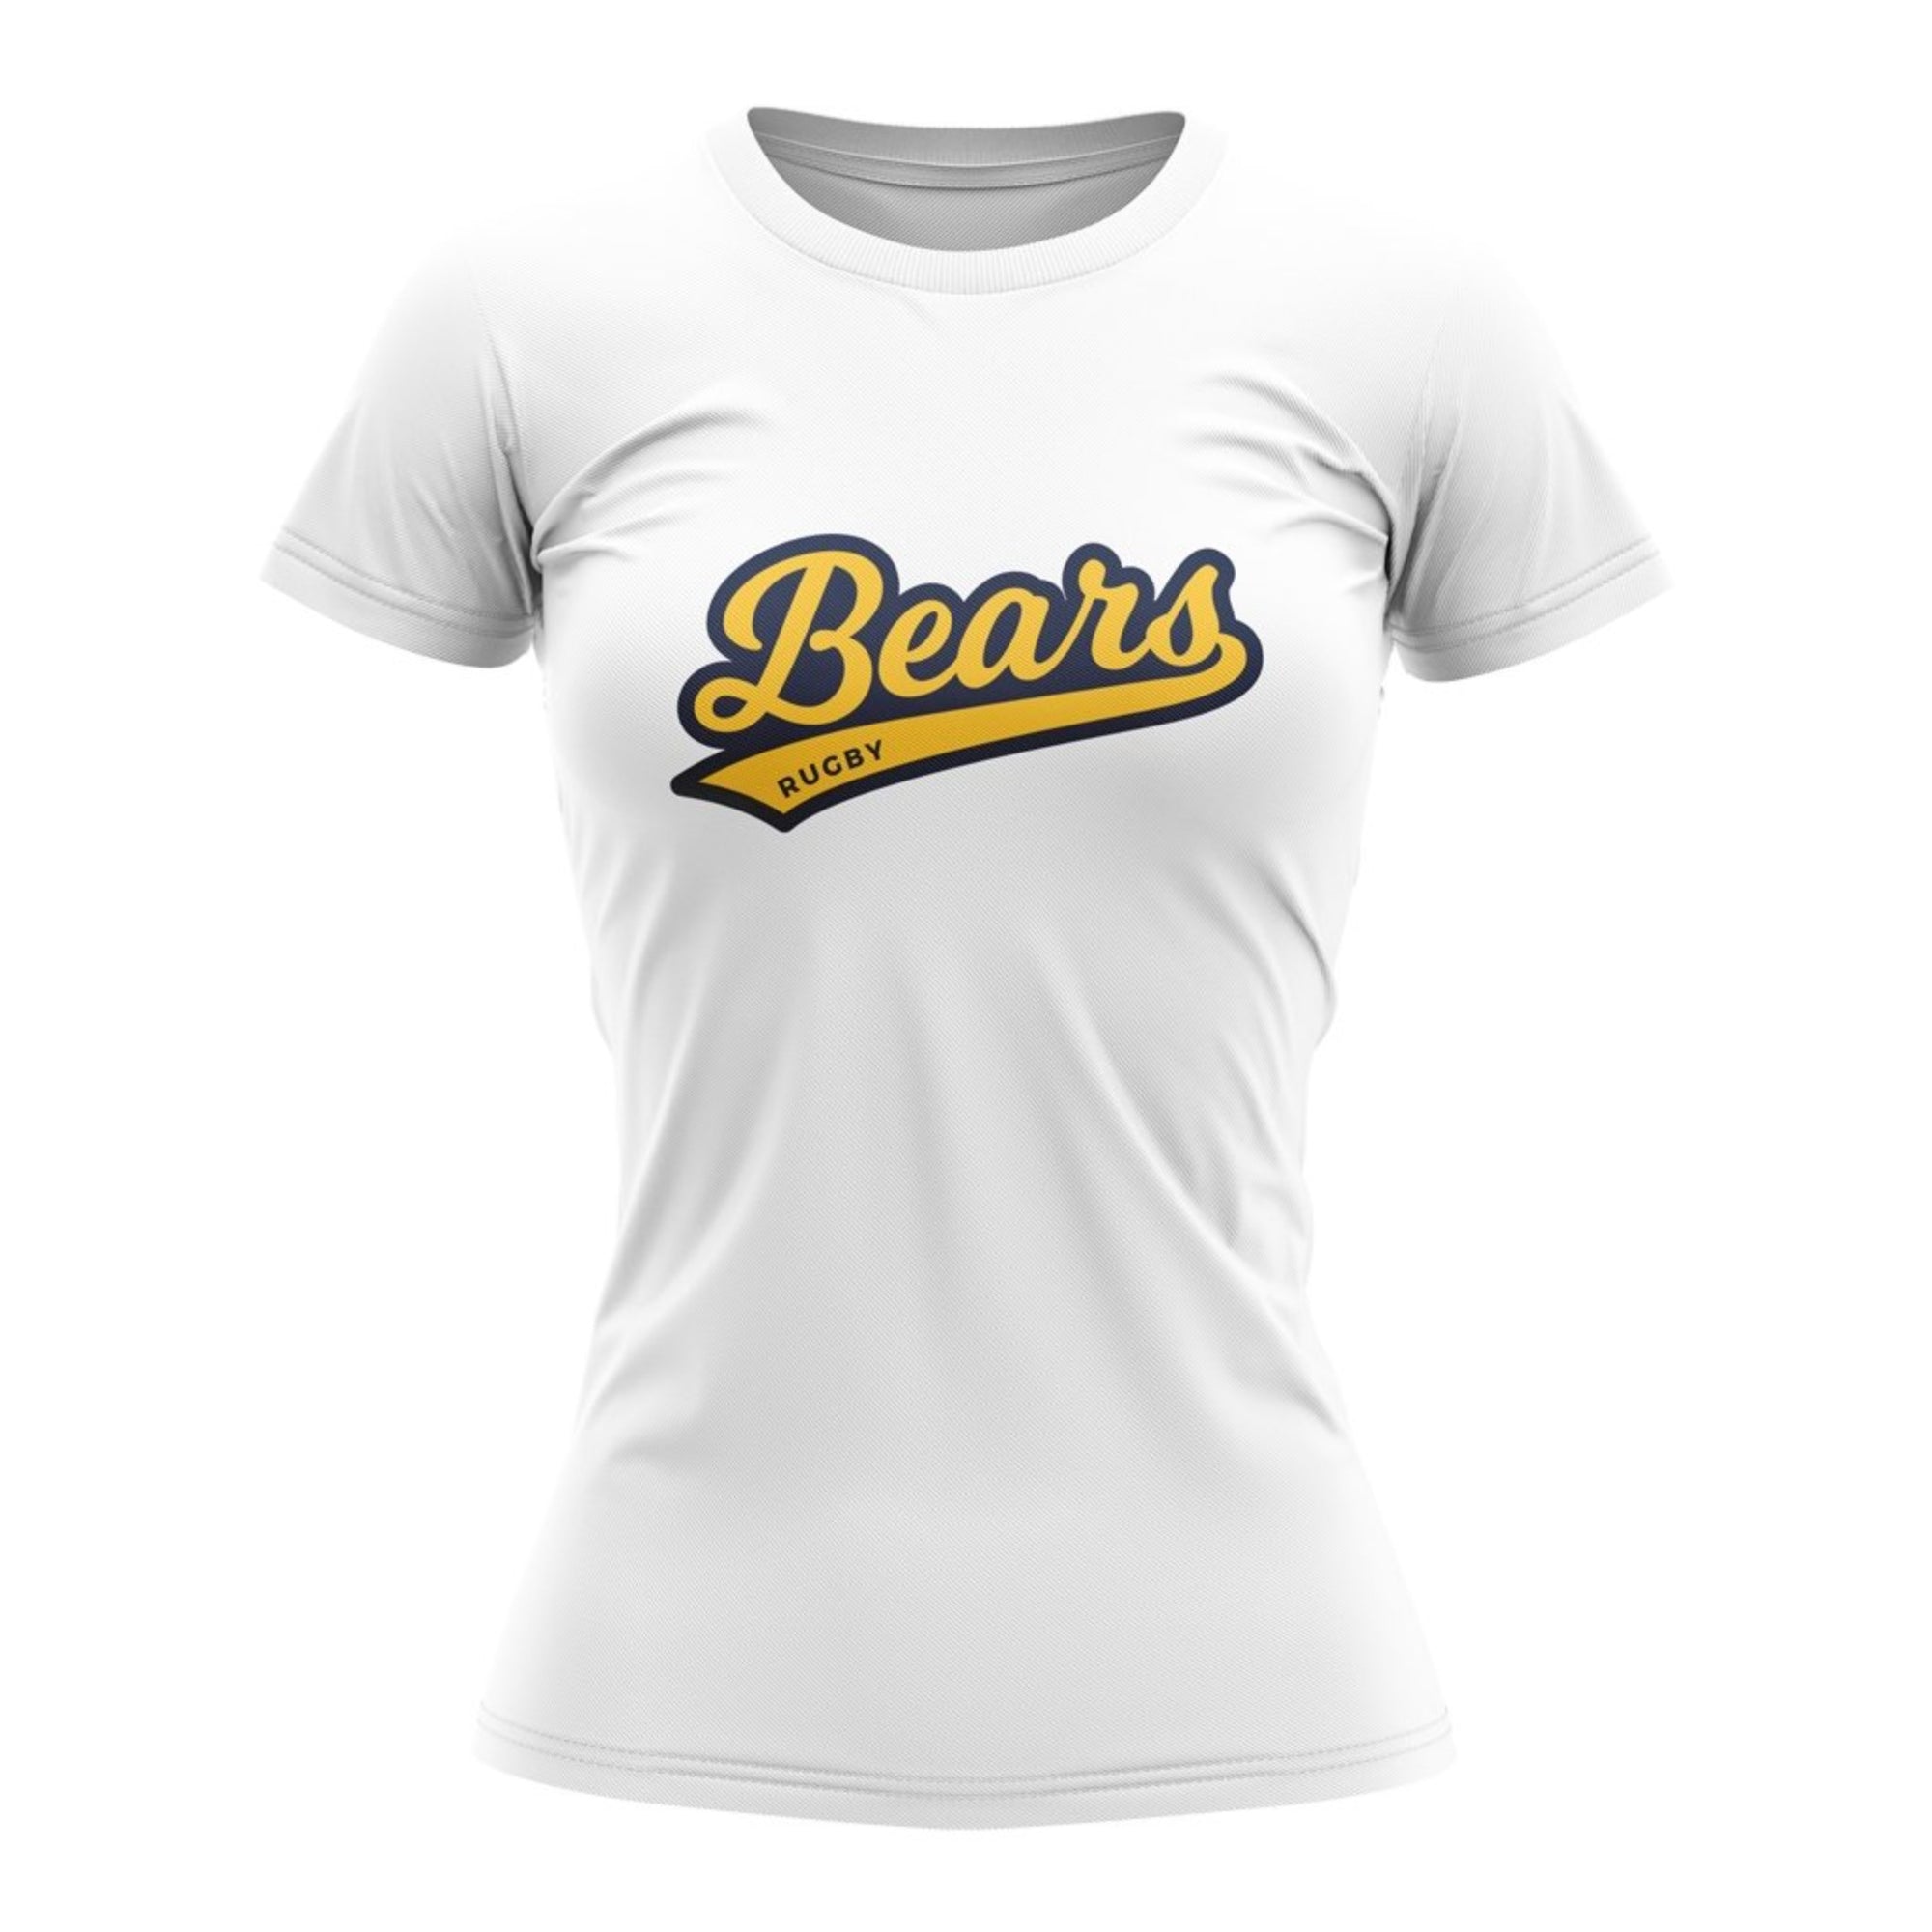 BC Rugby 2021 "Bears" Tee - Women's White/Gold - www.therugbyshop.com www.therugbyshop.com WOMENS / WHITE / XS XIX Brands TEES BC Rugby 2021 "Bears" Tee - Women's White/Gold